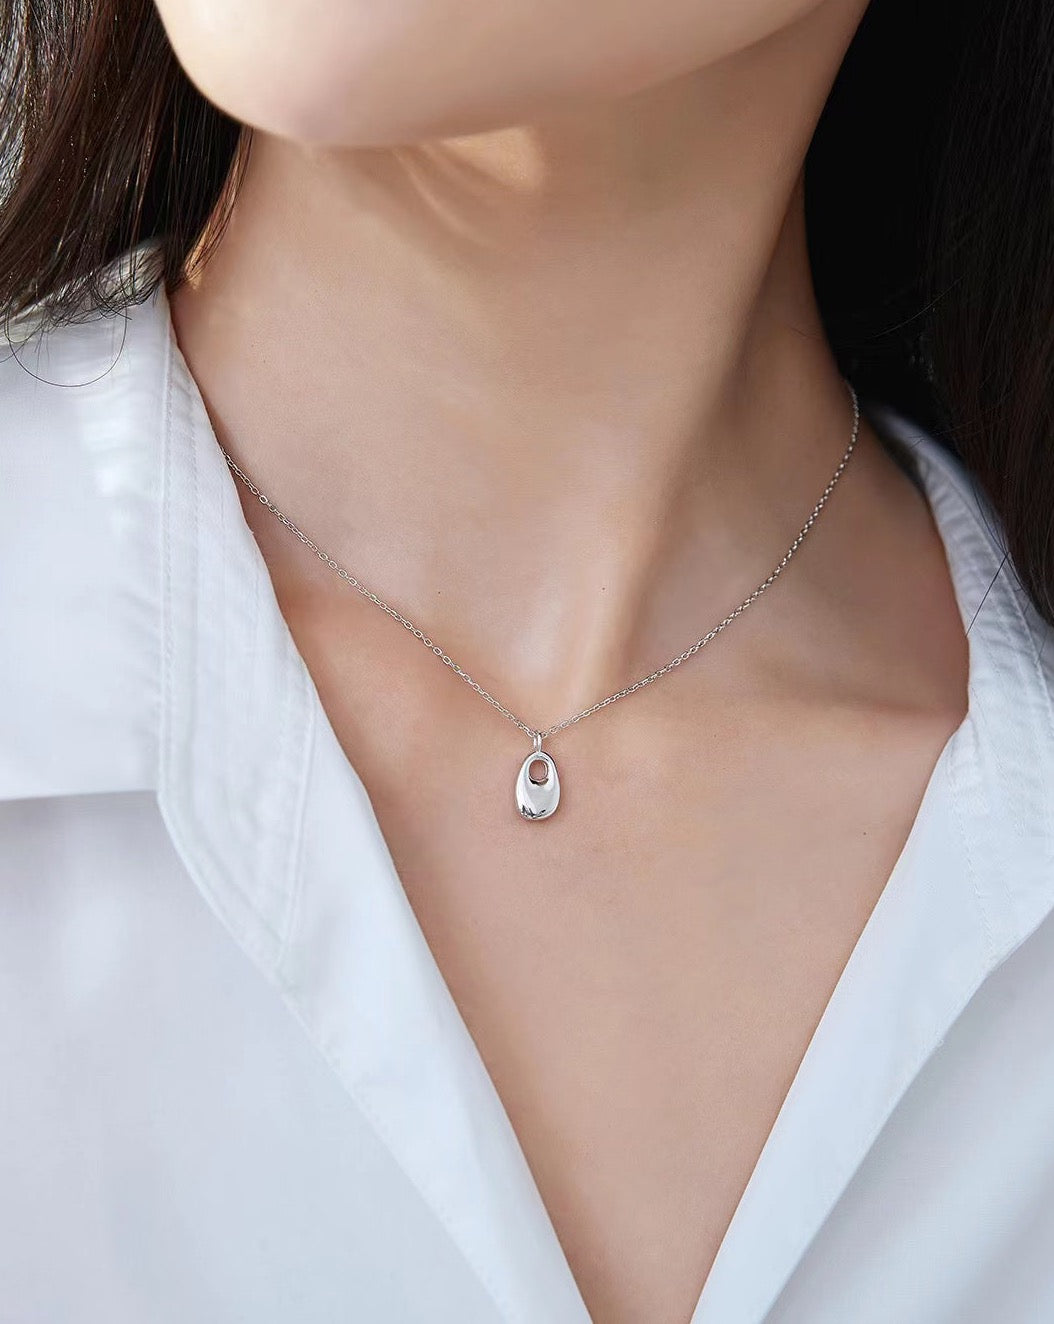 The Minimalist Sterling Silver Necklace